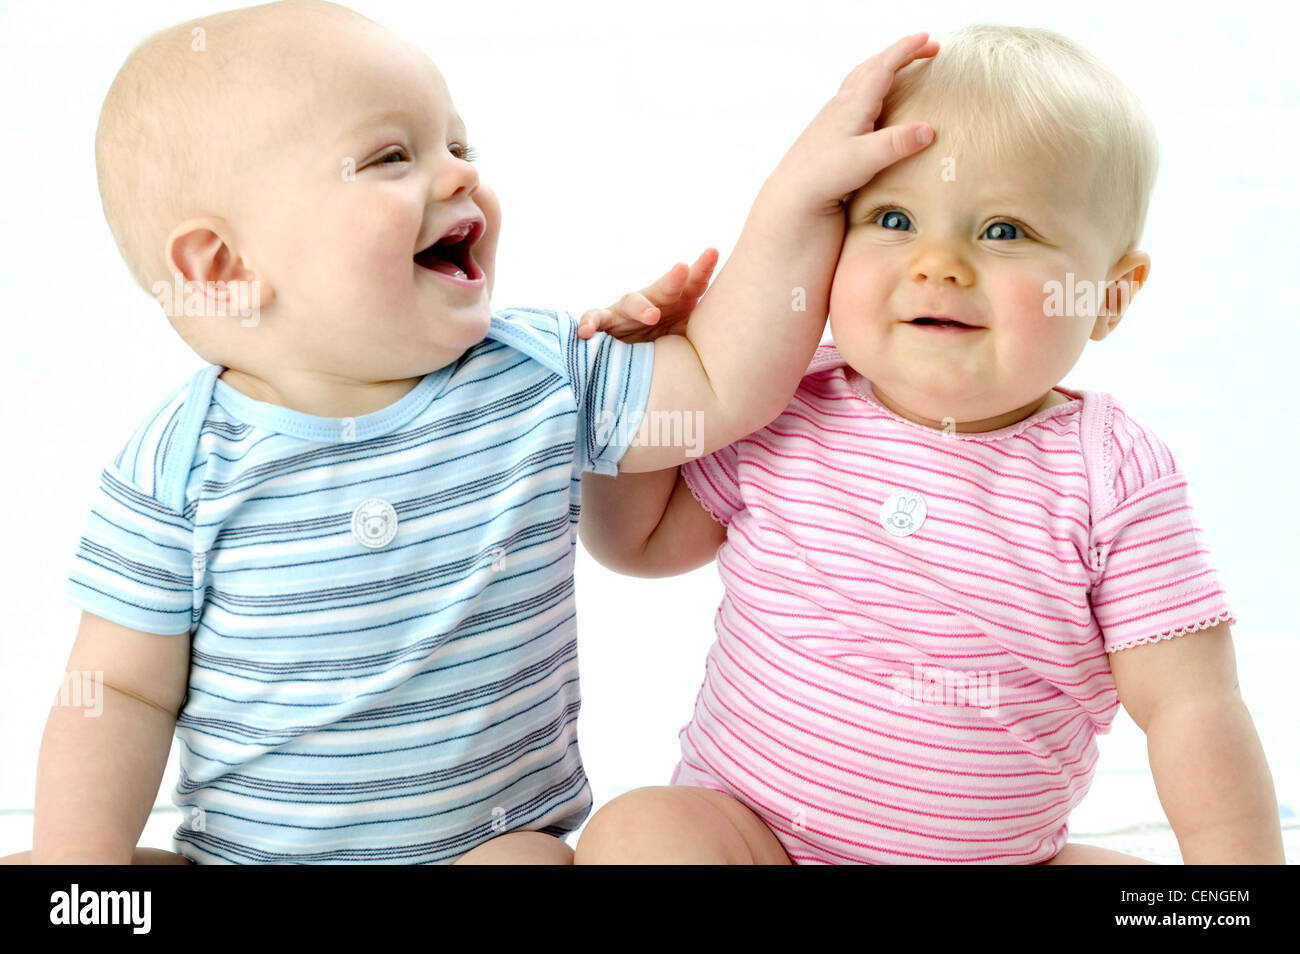 Two babies, male baby on left wearing blue striped babygro looking to side laughing hand on female babys head, baby on right Stock Photo